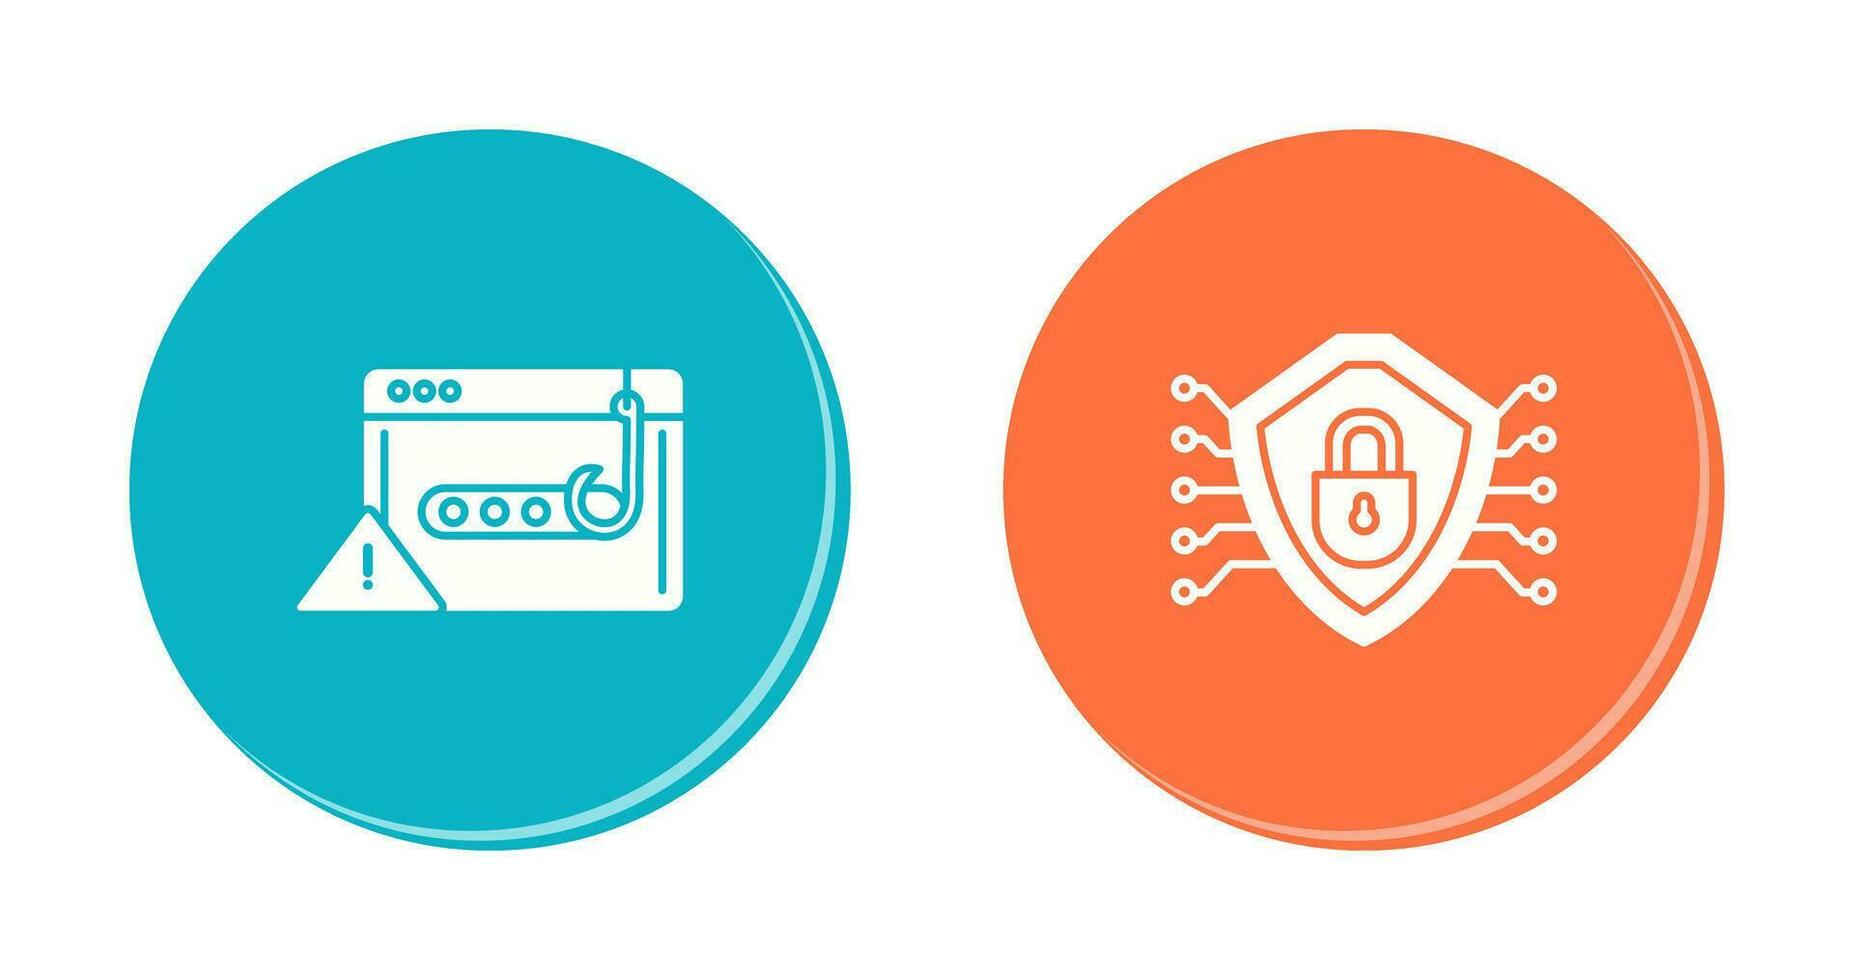 Phishing Password and Security Icon vector